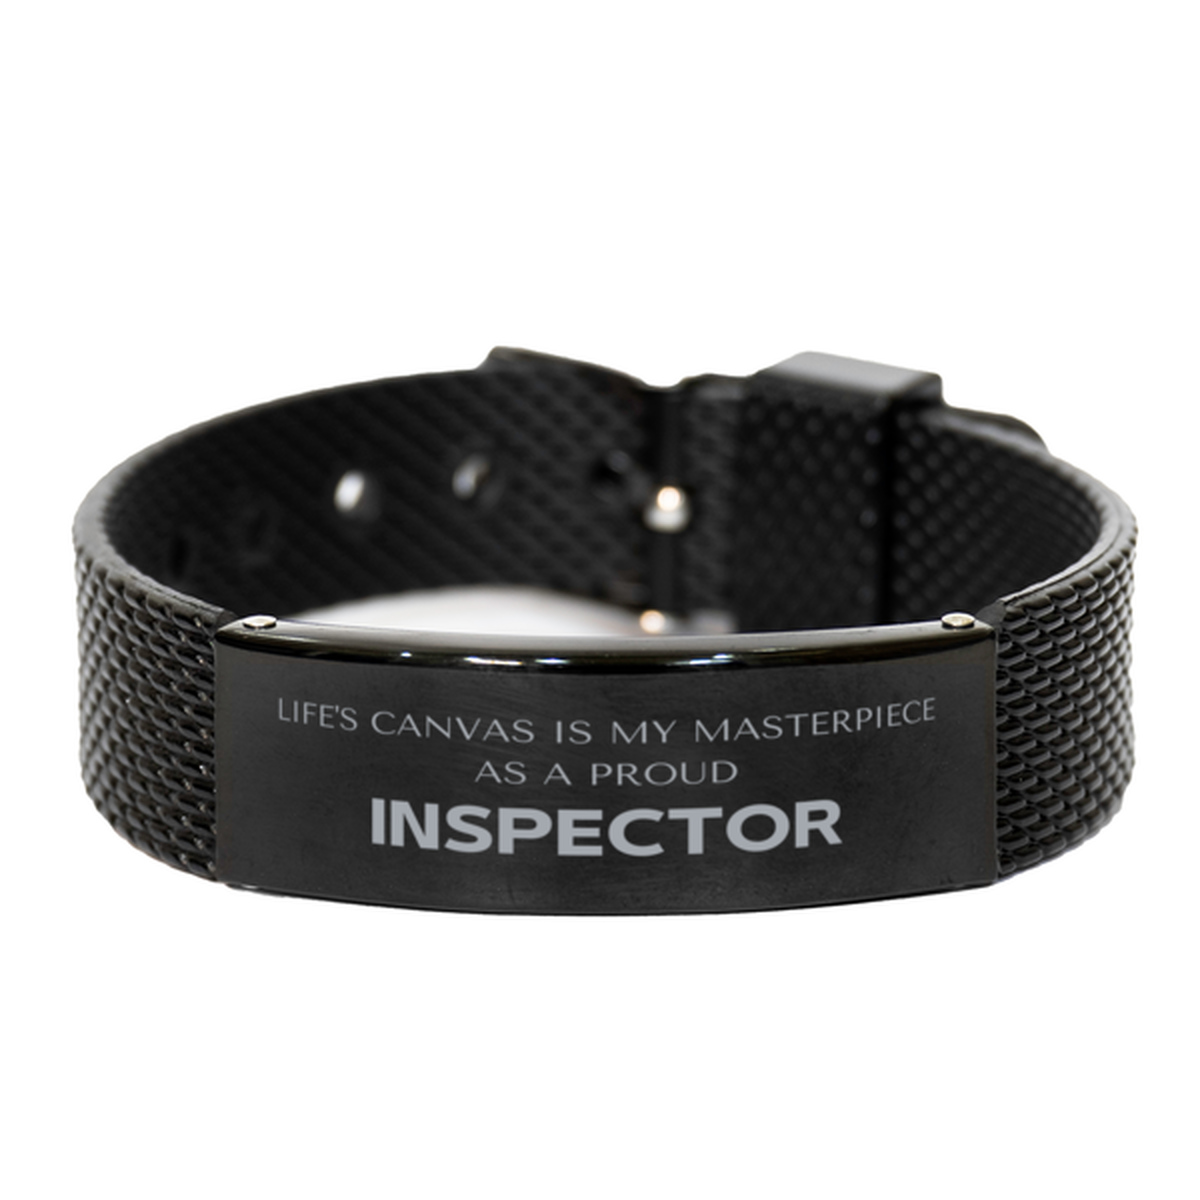 Proud Inspector Gifts, Life's canvas is my masterpiece, Epic Birthday Christmas Unique Black Shark Mesh Bracelet For Inspector, Coworkers, Men, Women, Friends